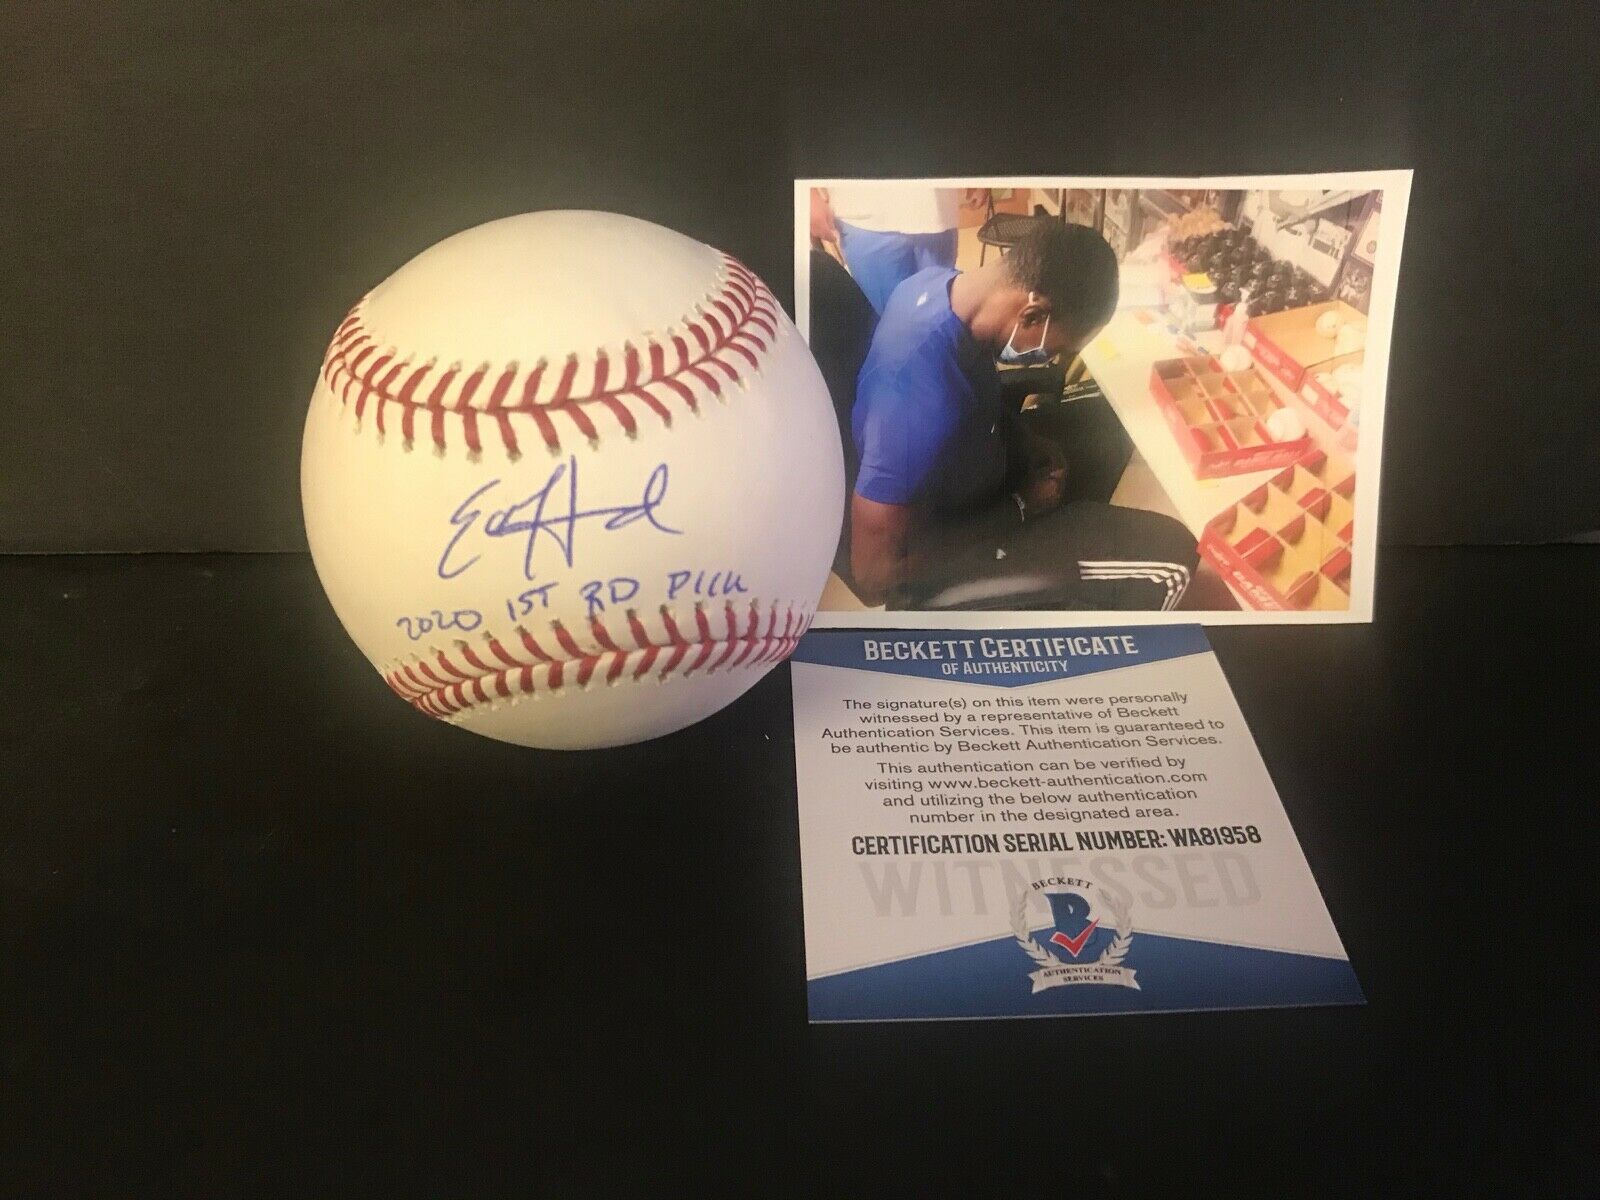 Ed Howard Chicago Cubs Autographed Signed Baseball Beckett WITNESS 1st Rd Pick .